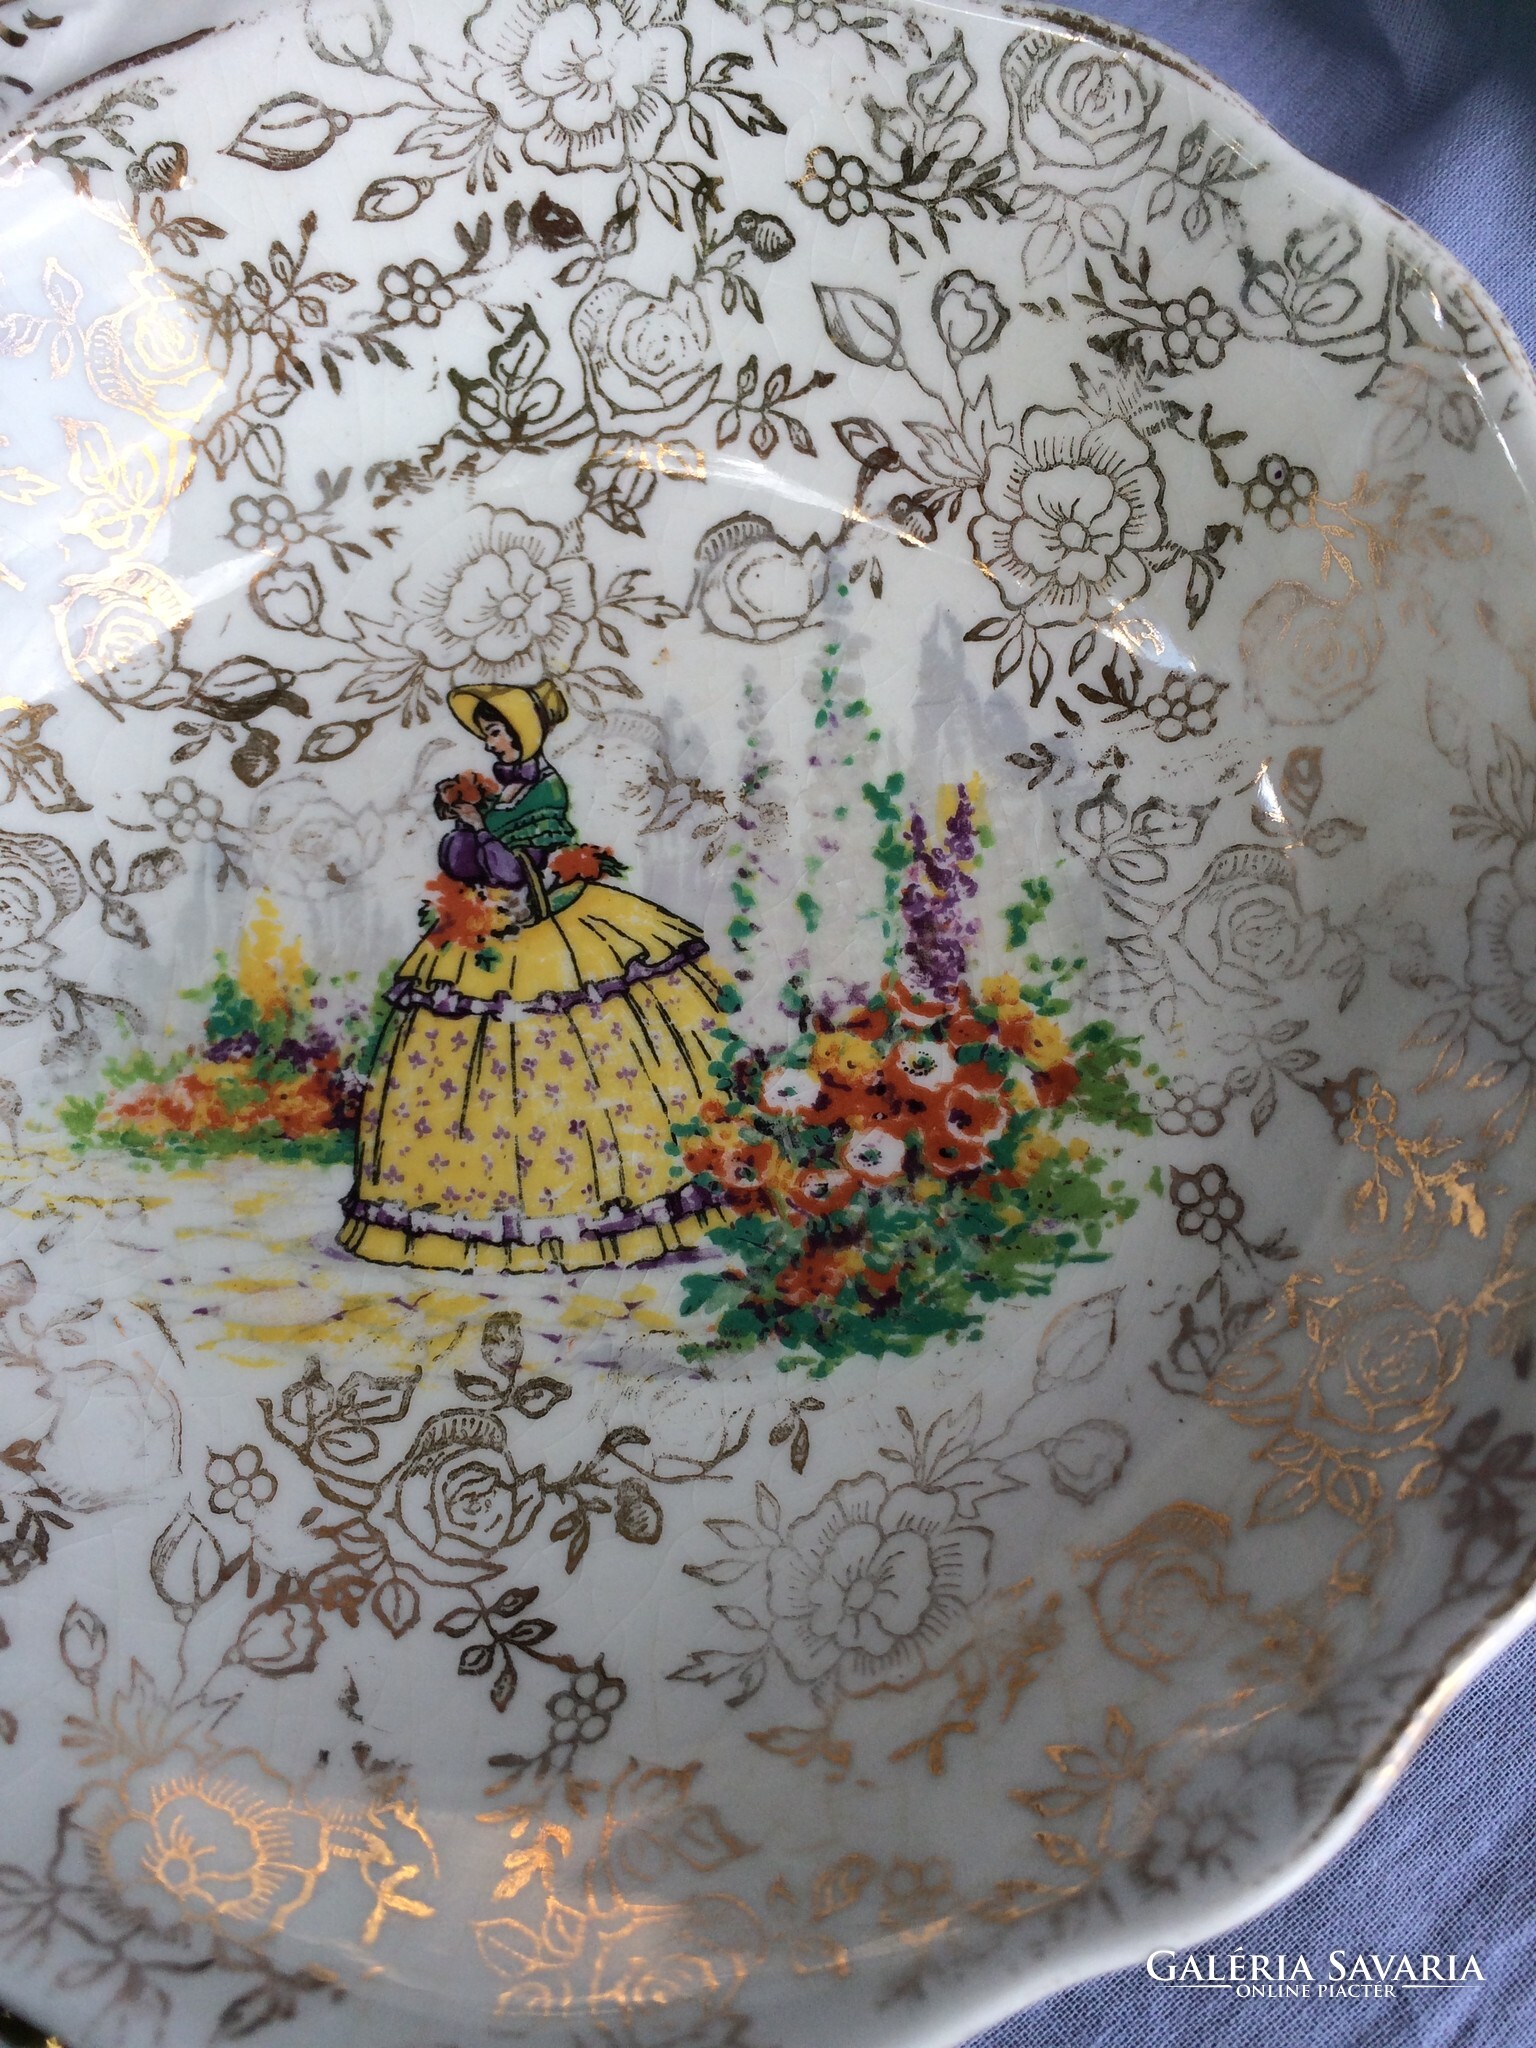 Crinoline lady English offer - Porcelains  Galeria Savaria online  marketplace - Buy or sell on a reliable, quality online platform!